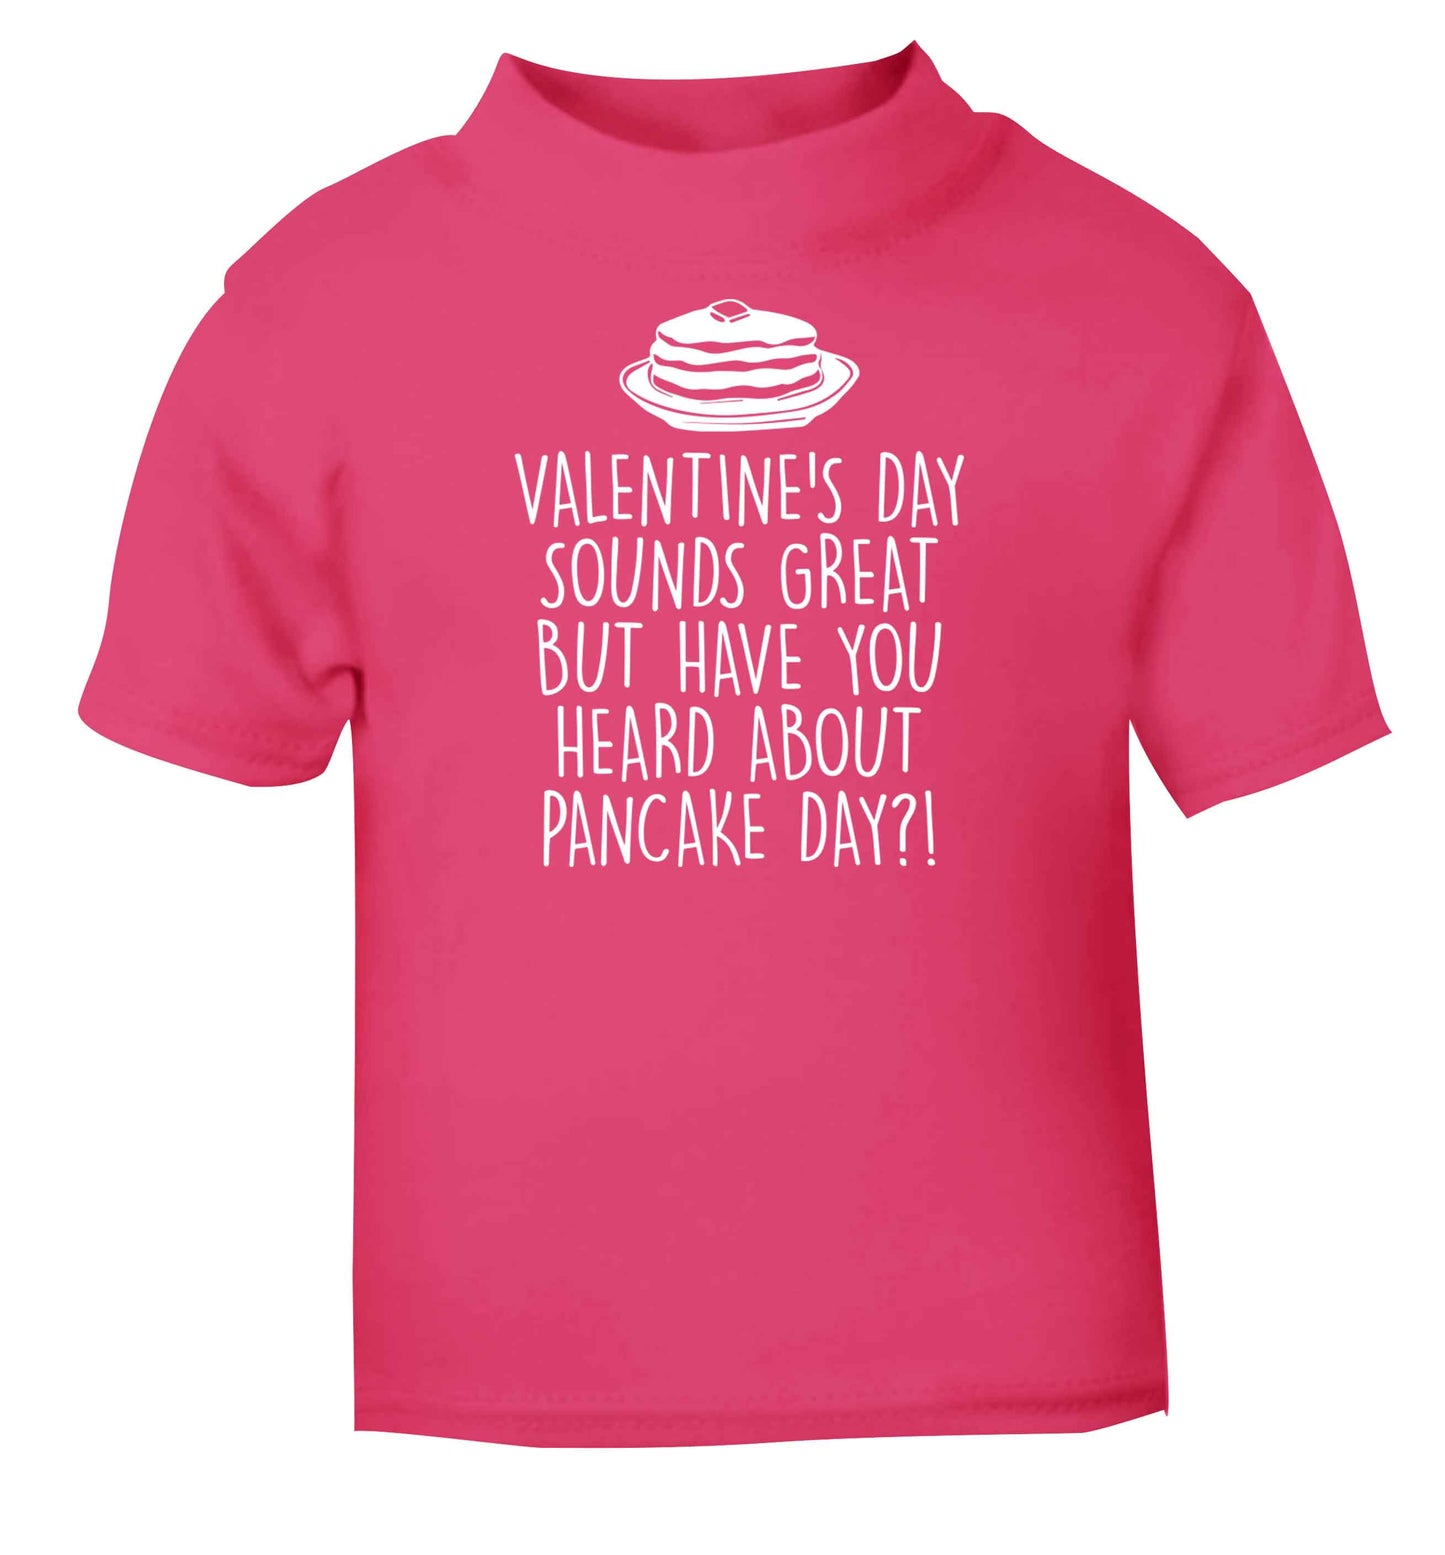 Valentine's day sounds great but have you heard about pancake day?! pink baby toddler Tshirt 2 Years